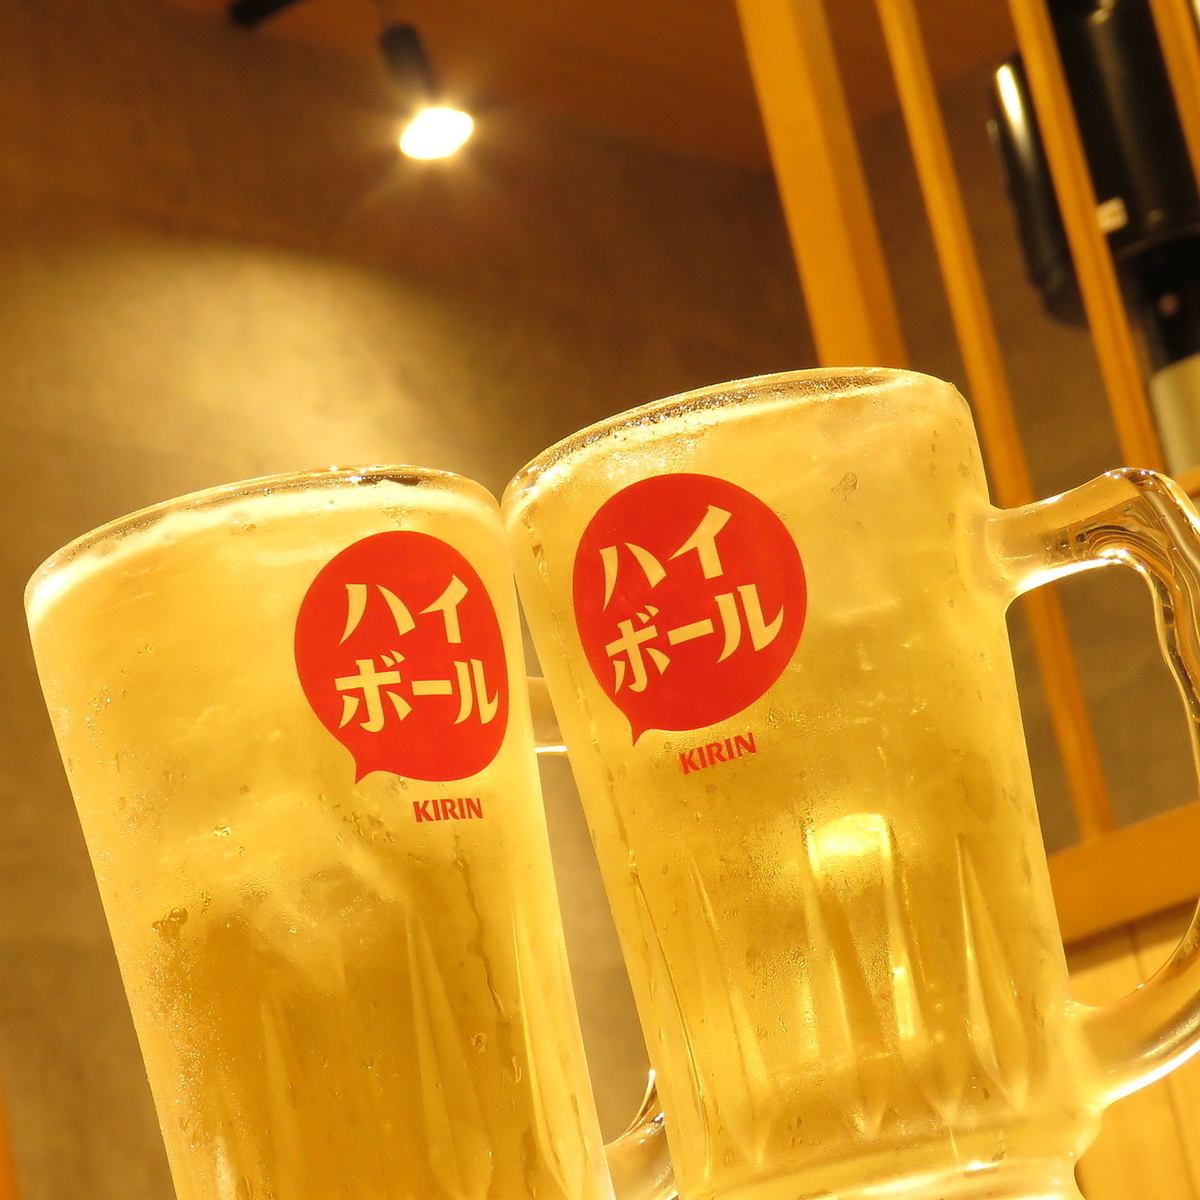 From 15:00 (13:00 on Saturdays and Sundays) to OPEN! A highball is 55 yen per cup until 19:00 ♪